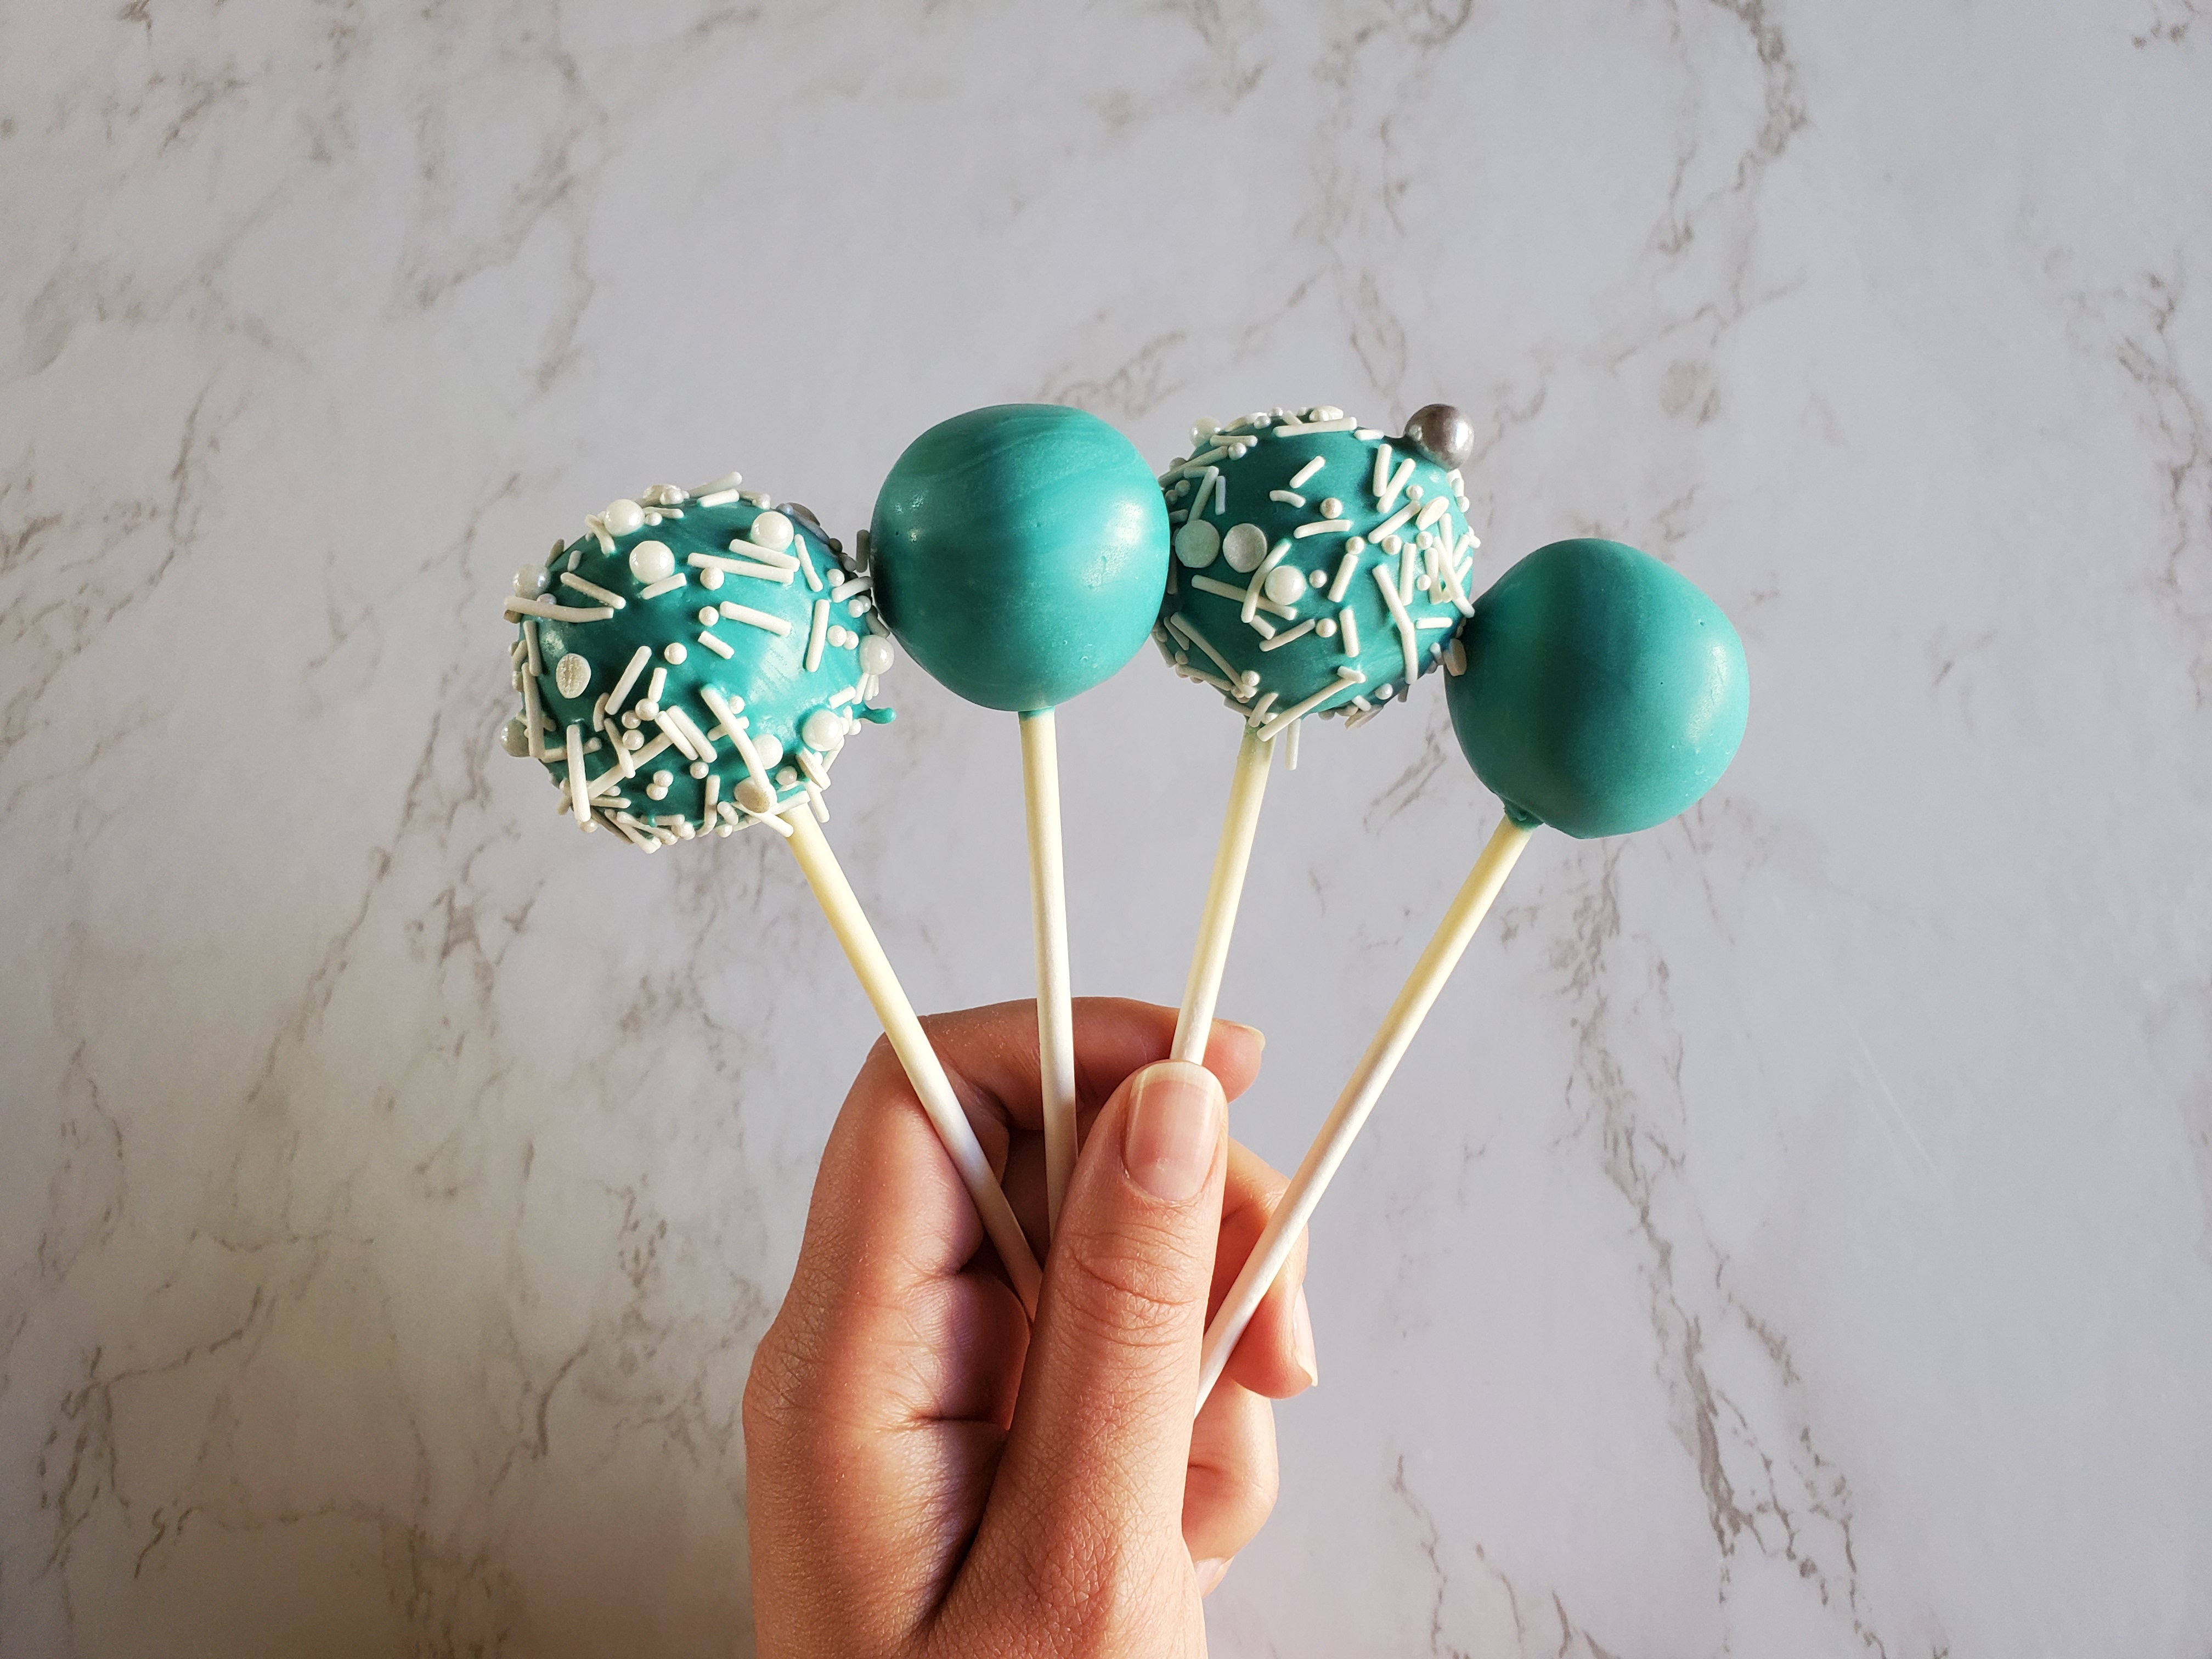 Turquoise cake pops with white and shiny round, gray sprinkles in a hand in front of a marble background.